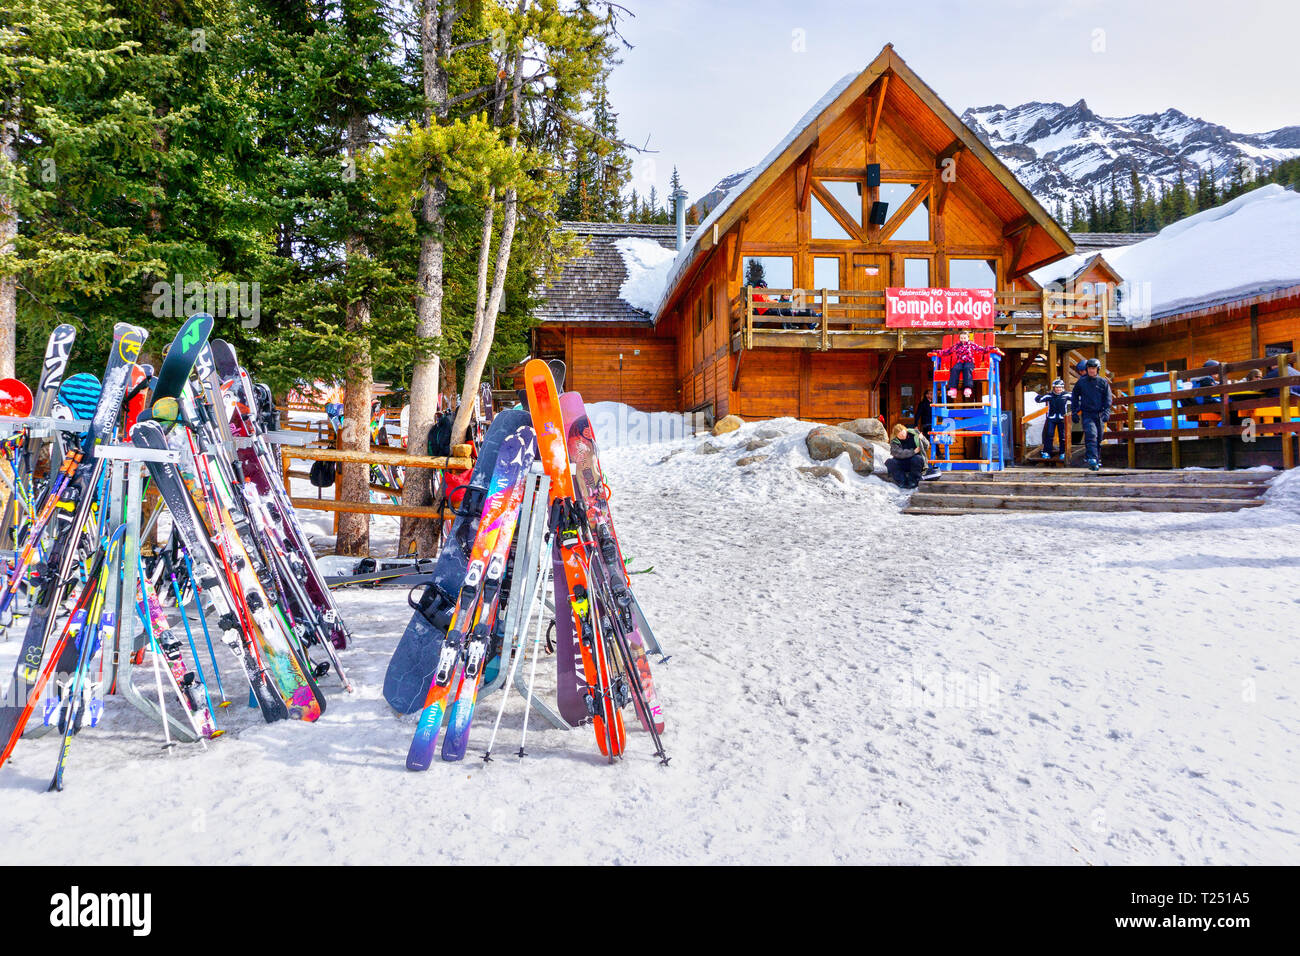 LAKE LOUISE, CANADA - MAR 23, 2019: Colorful skis and snowboads line the rack outside the old and rustic Temple Lodge at Lake Louise in the back mount Stock Photo